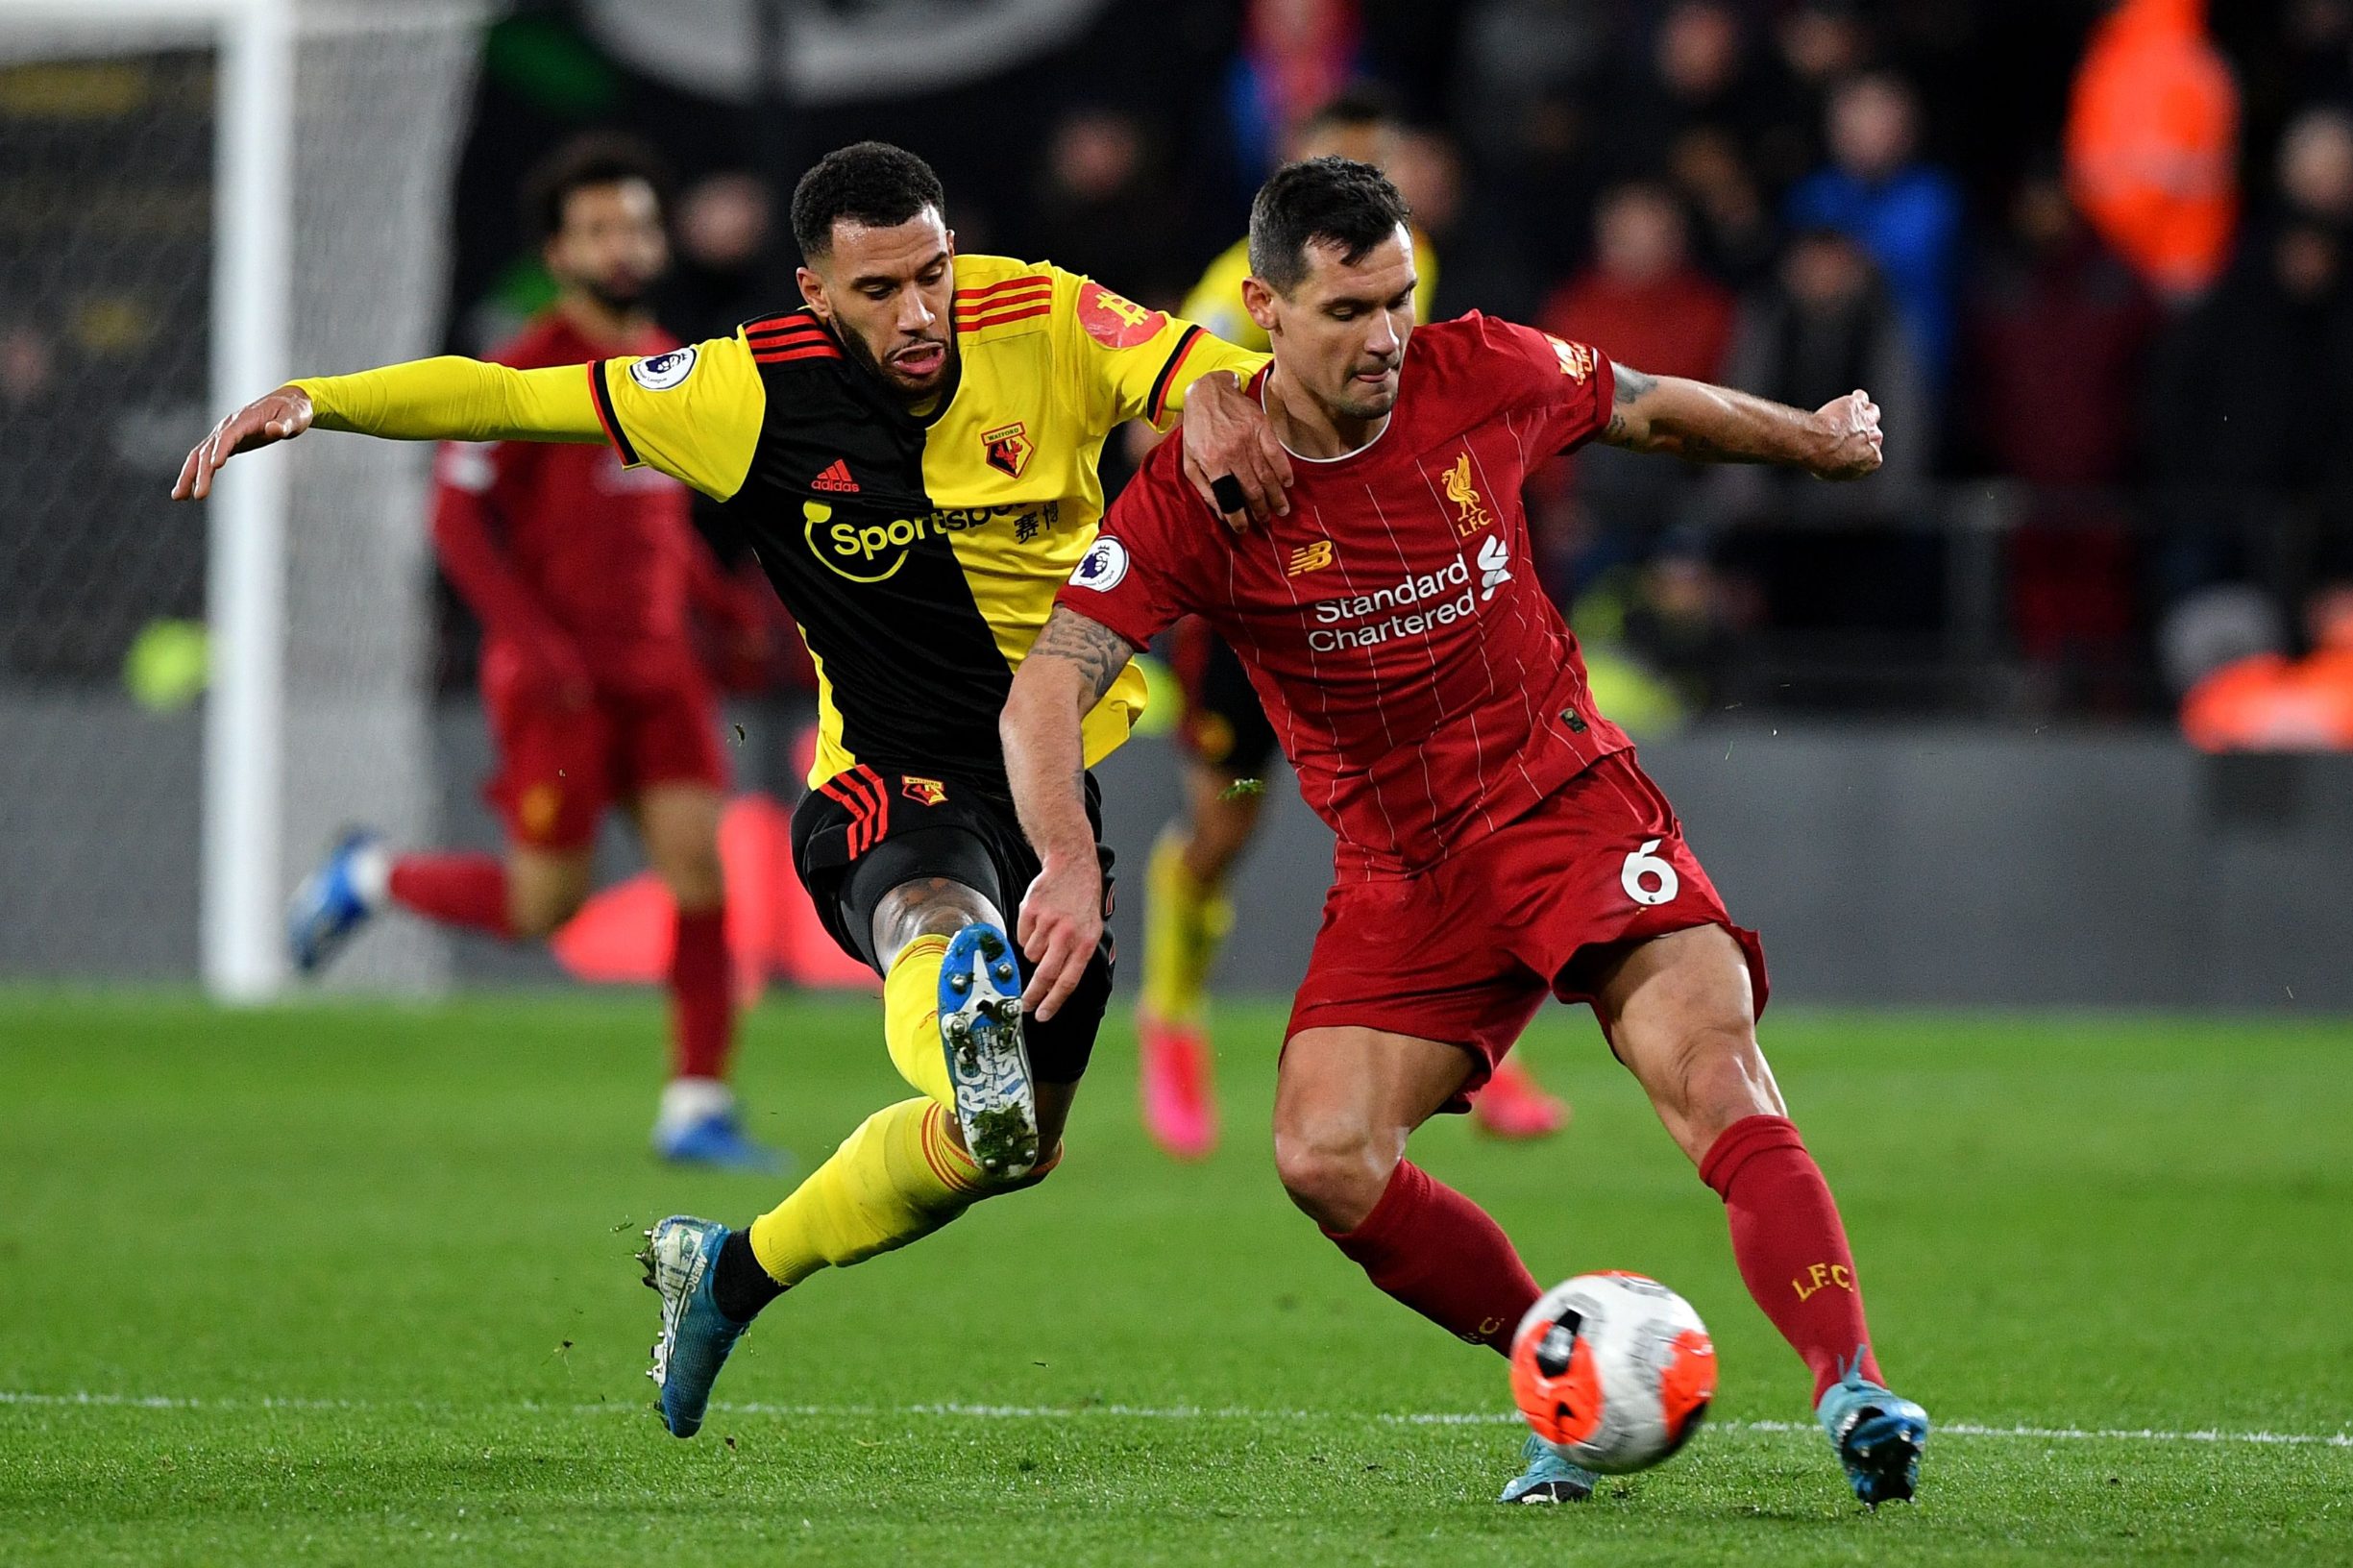 Watford's French midfielder Etienne Capoue (L) and Liverpool's Croatian defender Dejan Lovren vie for the ball during the English Premier League football match between Watford and Liverpool at Vicarage Road Stadium in Watford, north of London on February 29, 2020. (Photo by Justin TALLIS / AFP) / RESTRICTED TO EDITORIAL USE. No use with unauthorized audio, video, data, fixture lists, club/league logos or 'live' services. Online in-match use limited to 120 images. An additional 40 images may be used in extra time. No video emulation. Social media in-match use limited to 120 images. An additional 40 images may be used in extra time. No use in betting publications, games or single club/league/player publications. / 